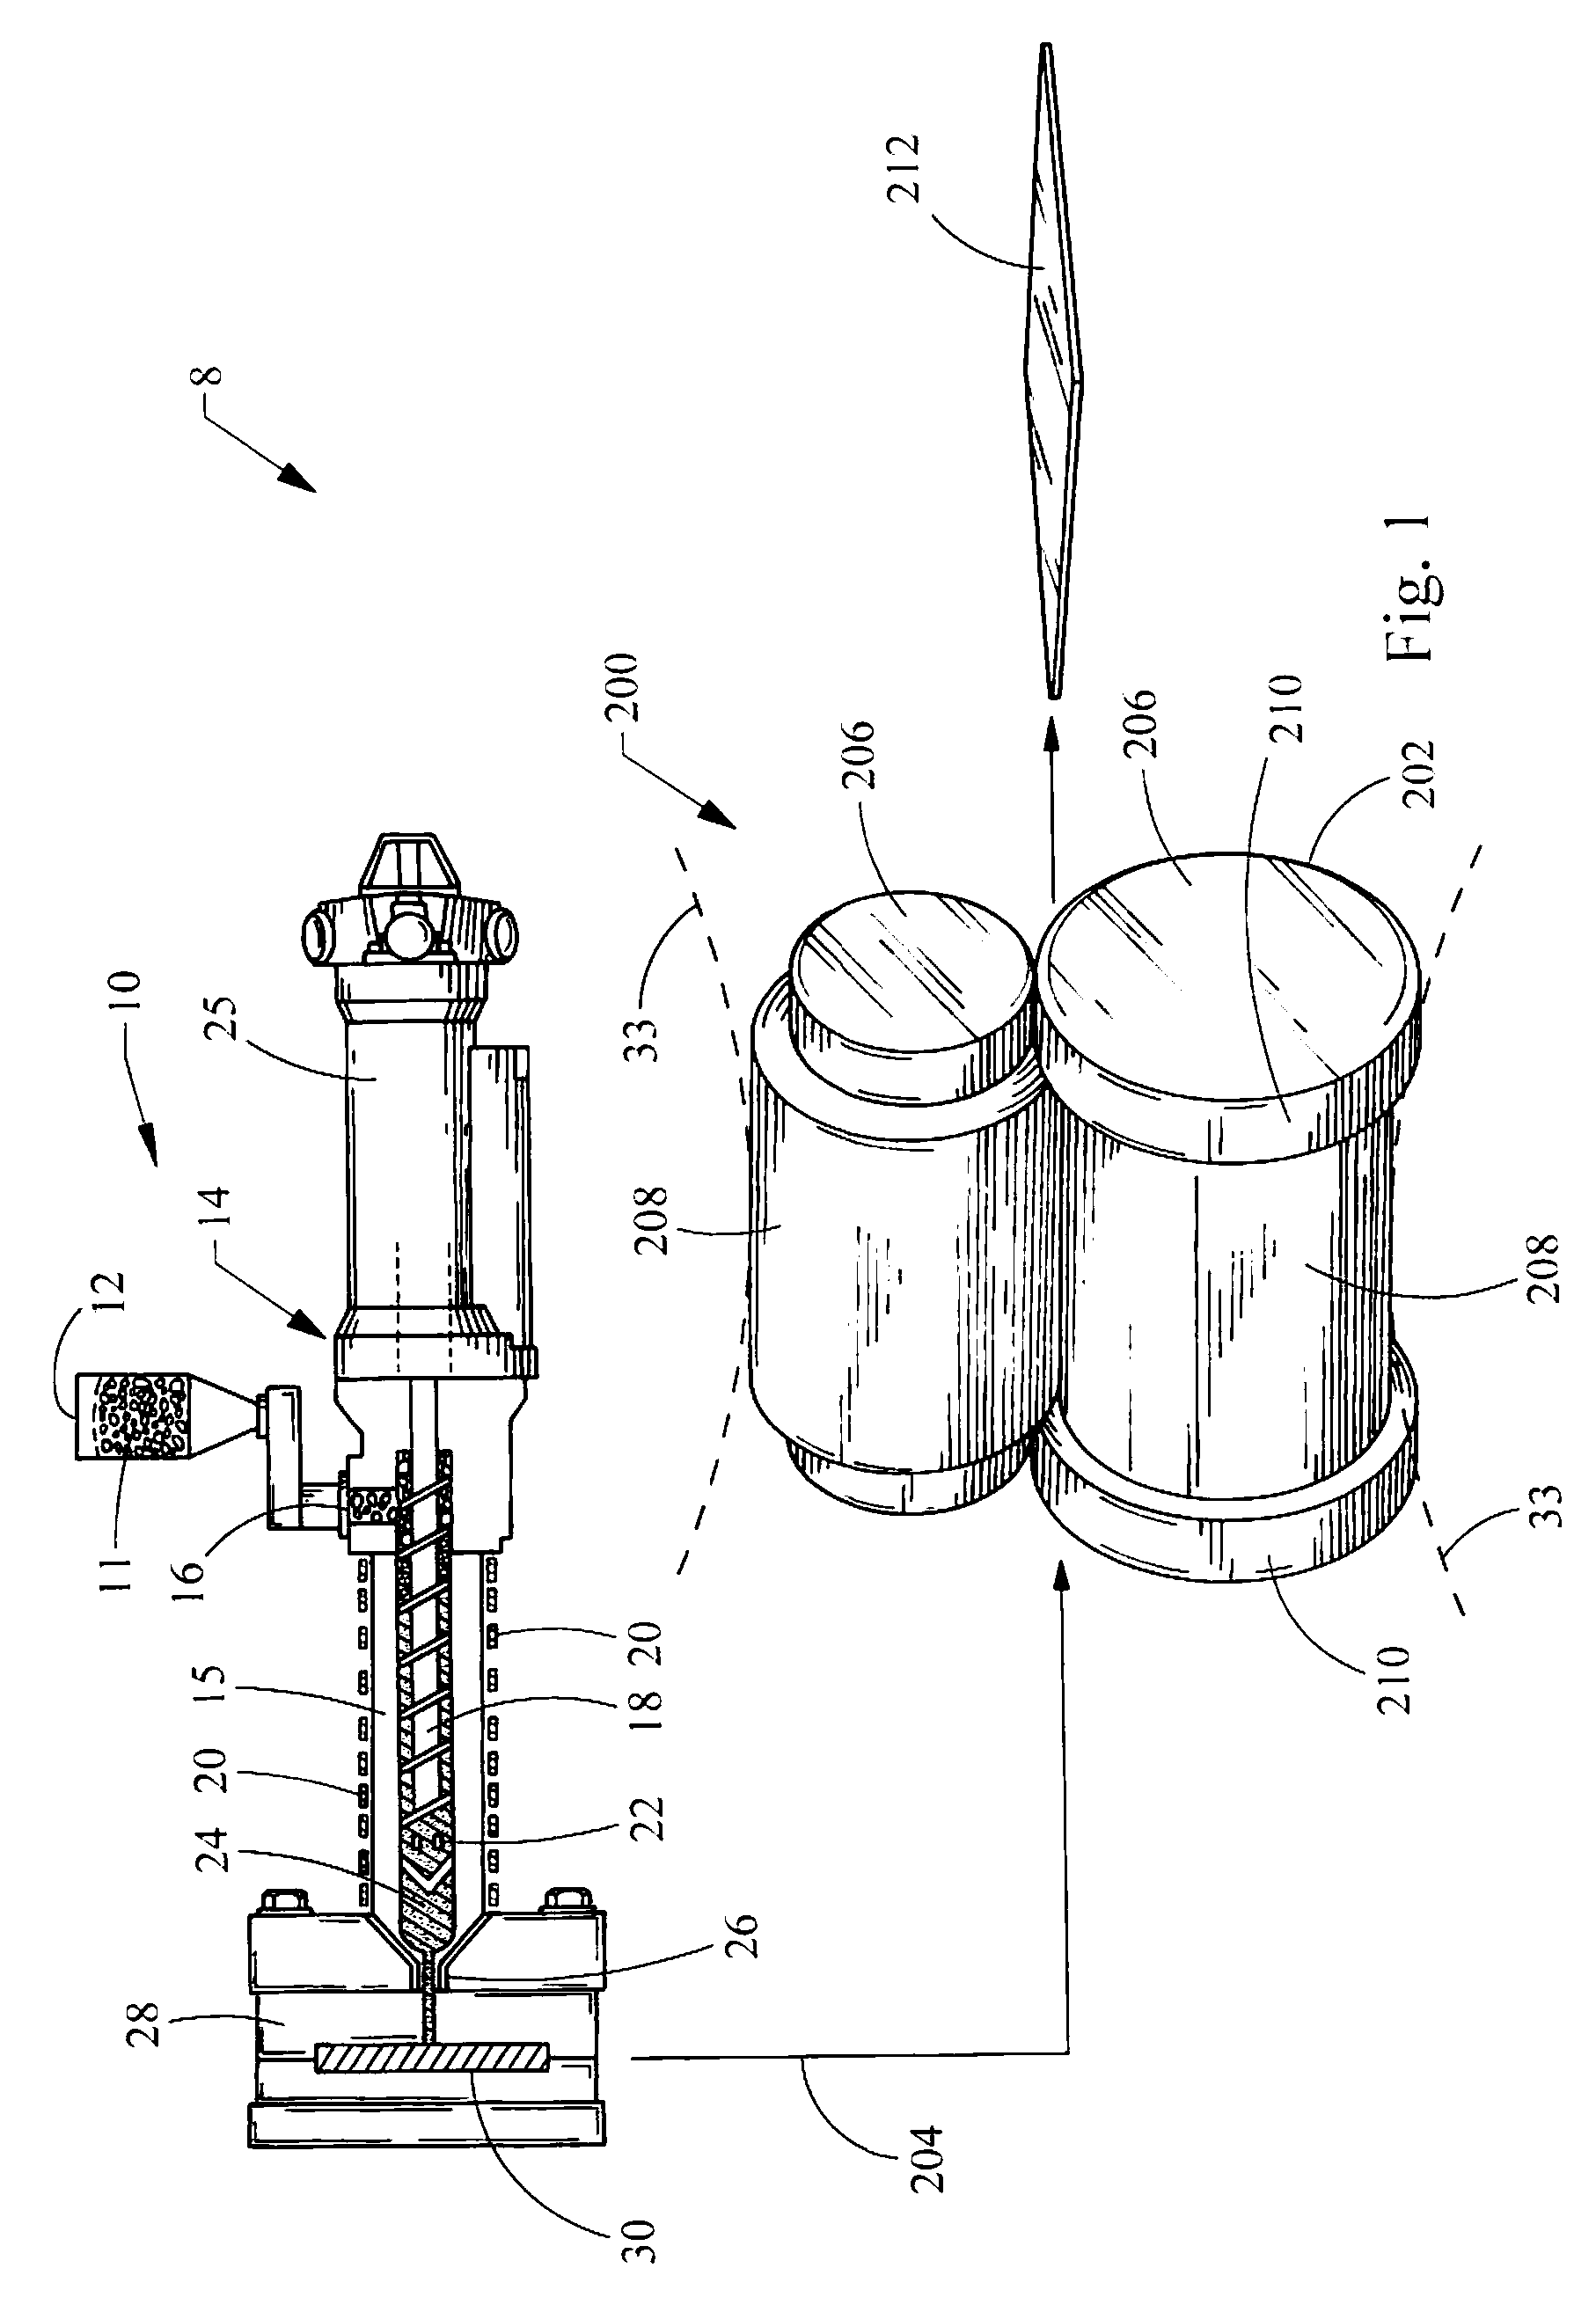 Apparatus and method of producing a fine grained metal sheet for forming net-shape components